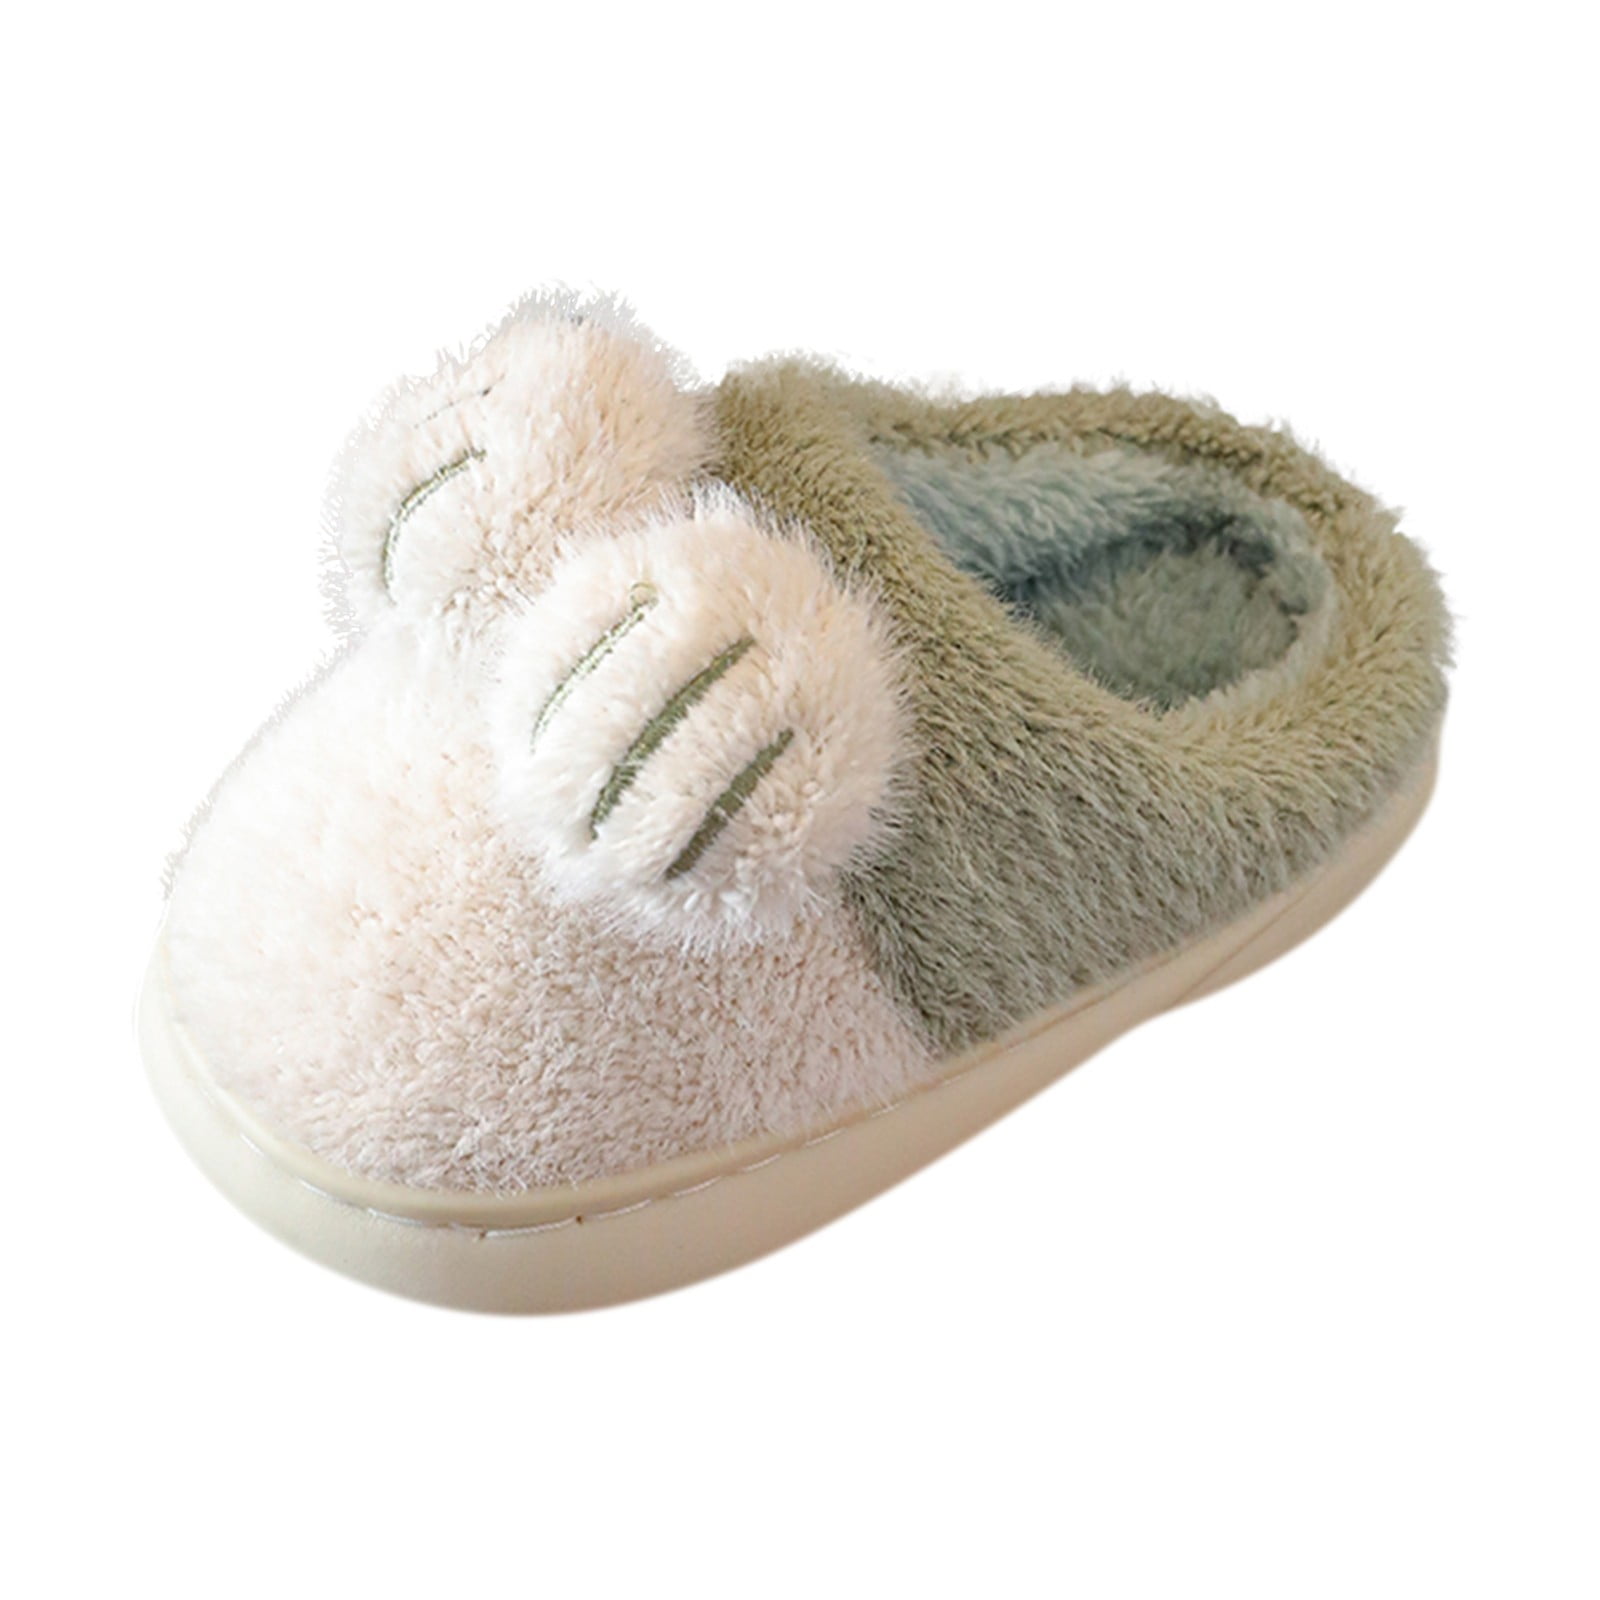 House Slippers for Toddlers Girls Cotton Slippers Girls Boys Memory Foam Comfy House Bedroom Home Slippers Winter Warm Indoor Shoes - Walmart.com